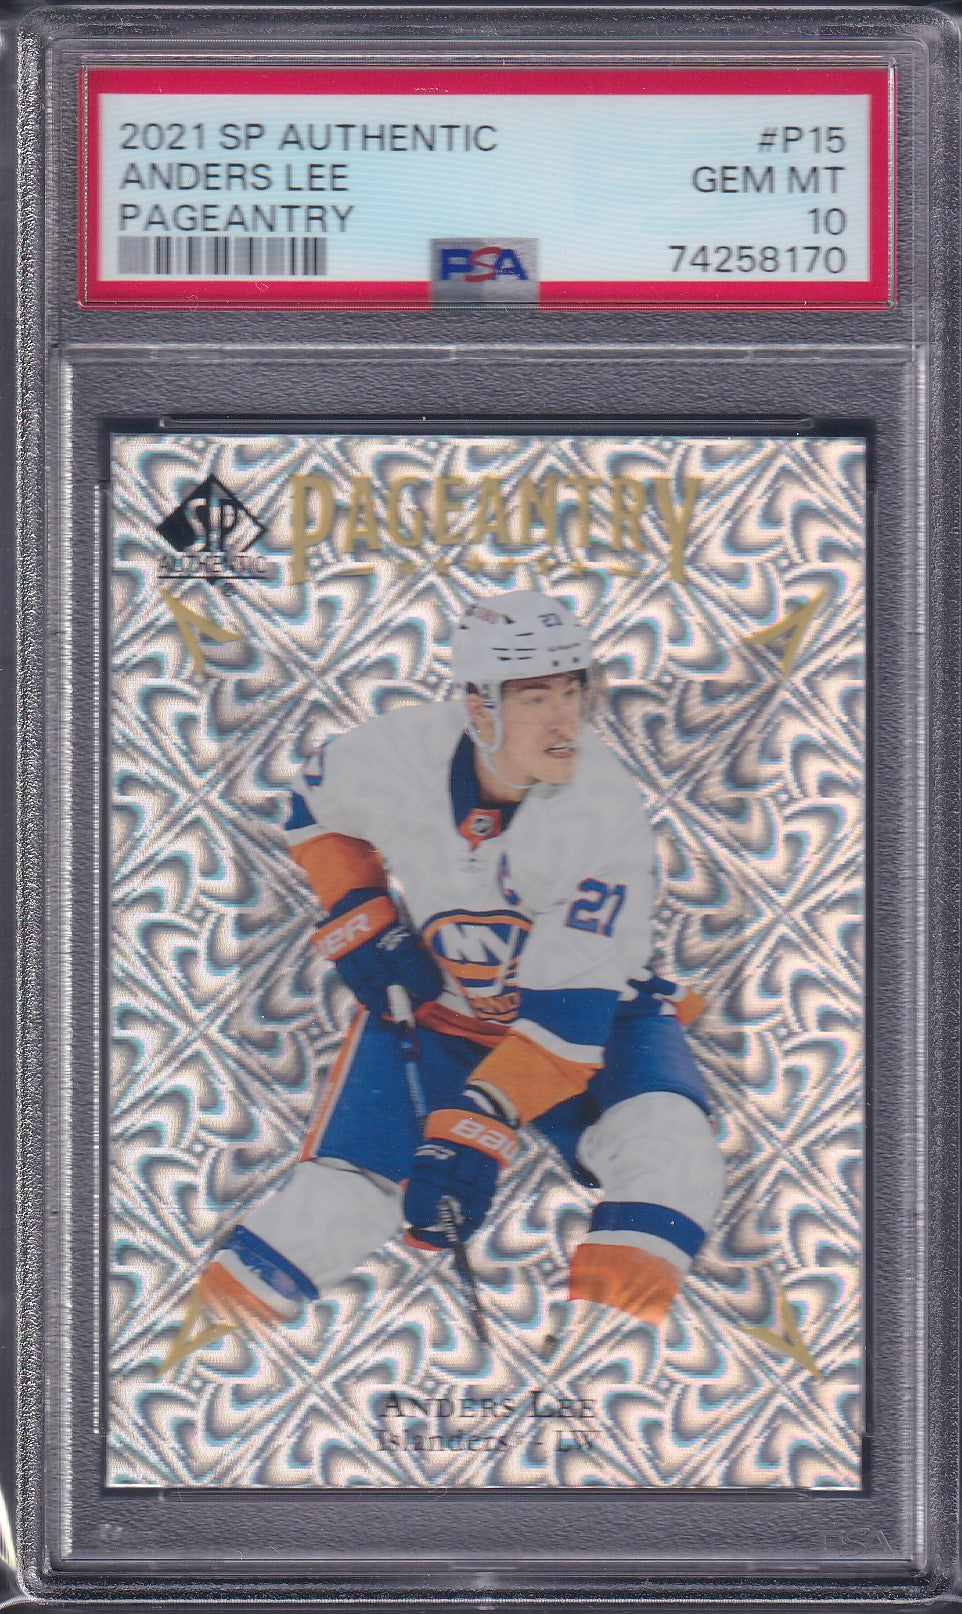 ANDERS LEE - 2021 SP Authentic Pageantry #P15, PSA 10